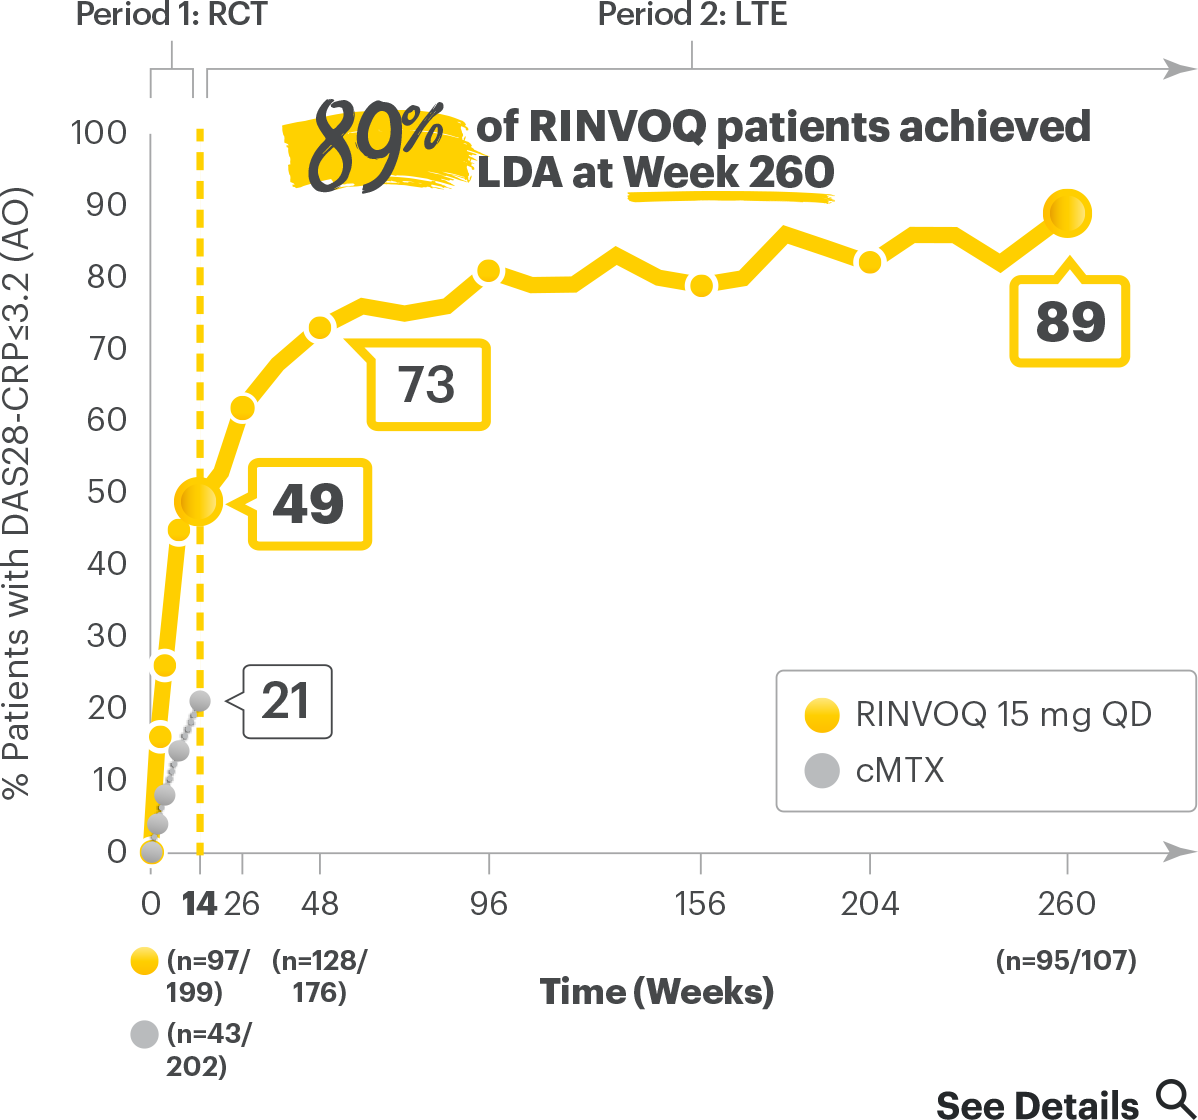 SELECT-MONOTHERAPY: LDA (DAS28-CRP≤3.2) RINVOQ vs cMTX up to Week 260 (AO)